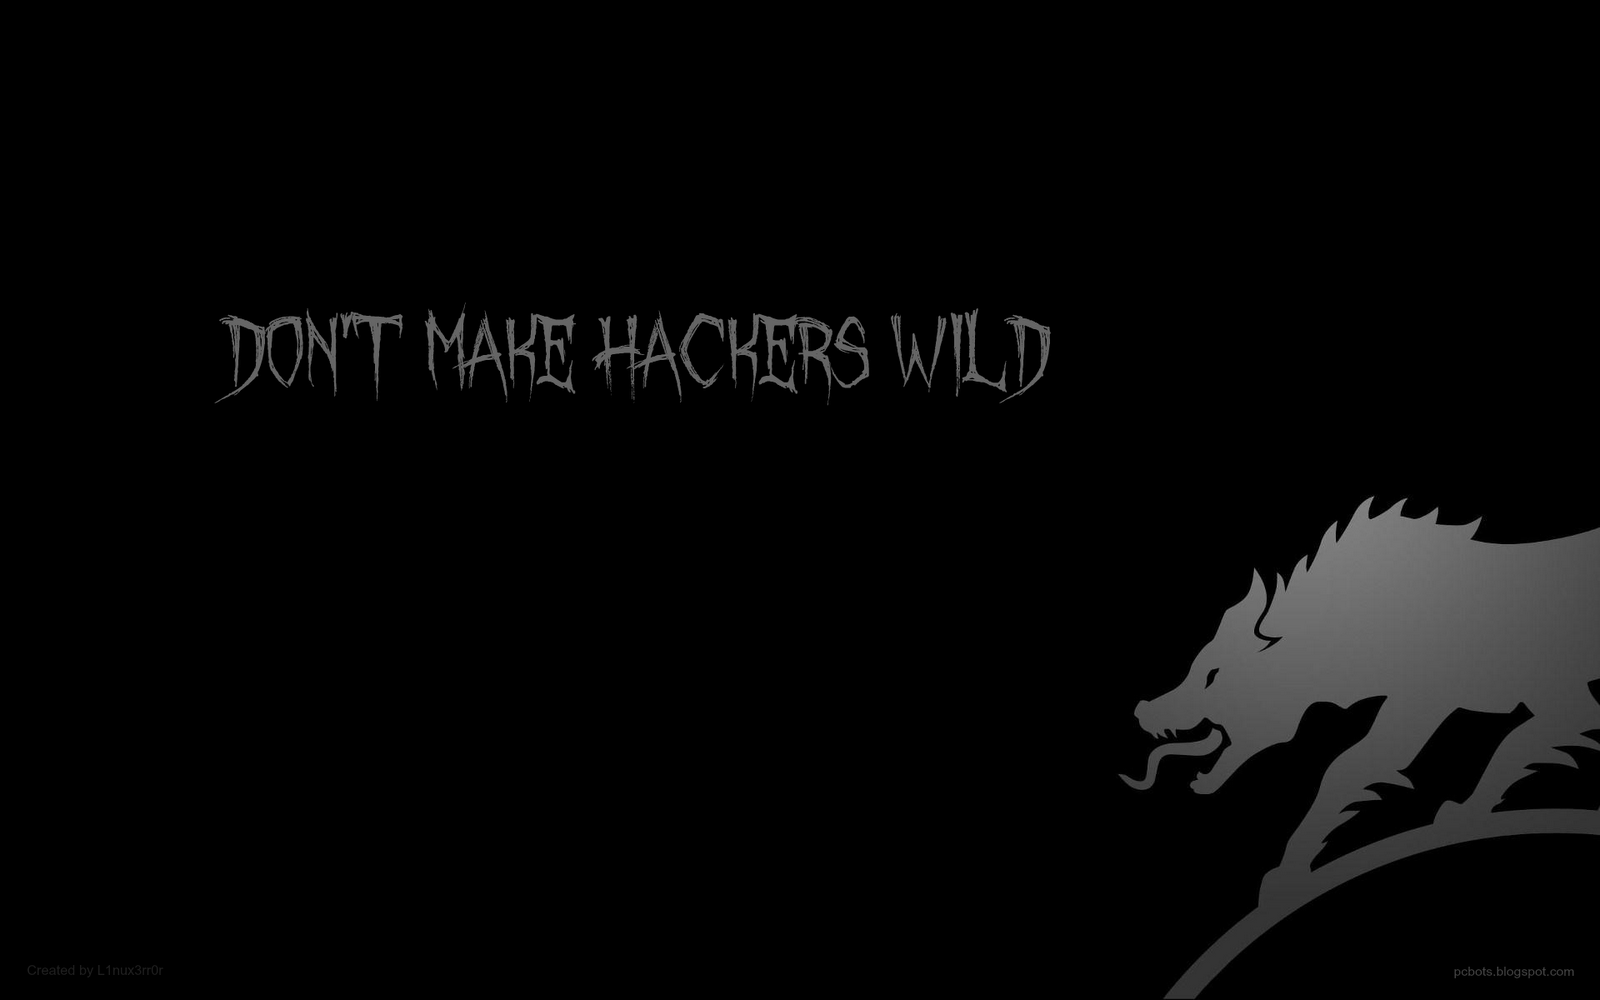    HD Wallpapers From All Kinds Free To Download Hacker wallpaper